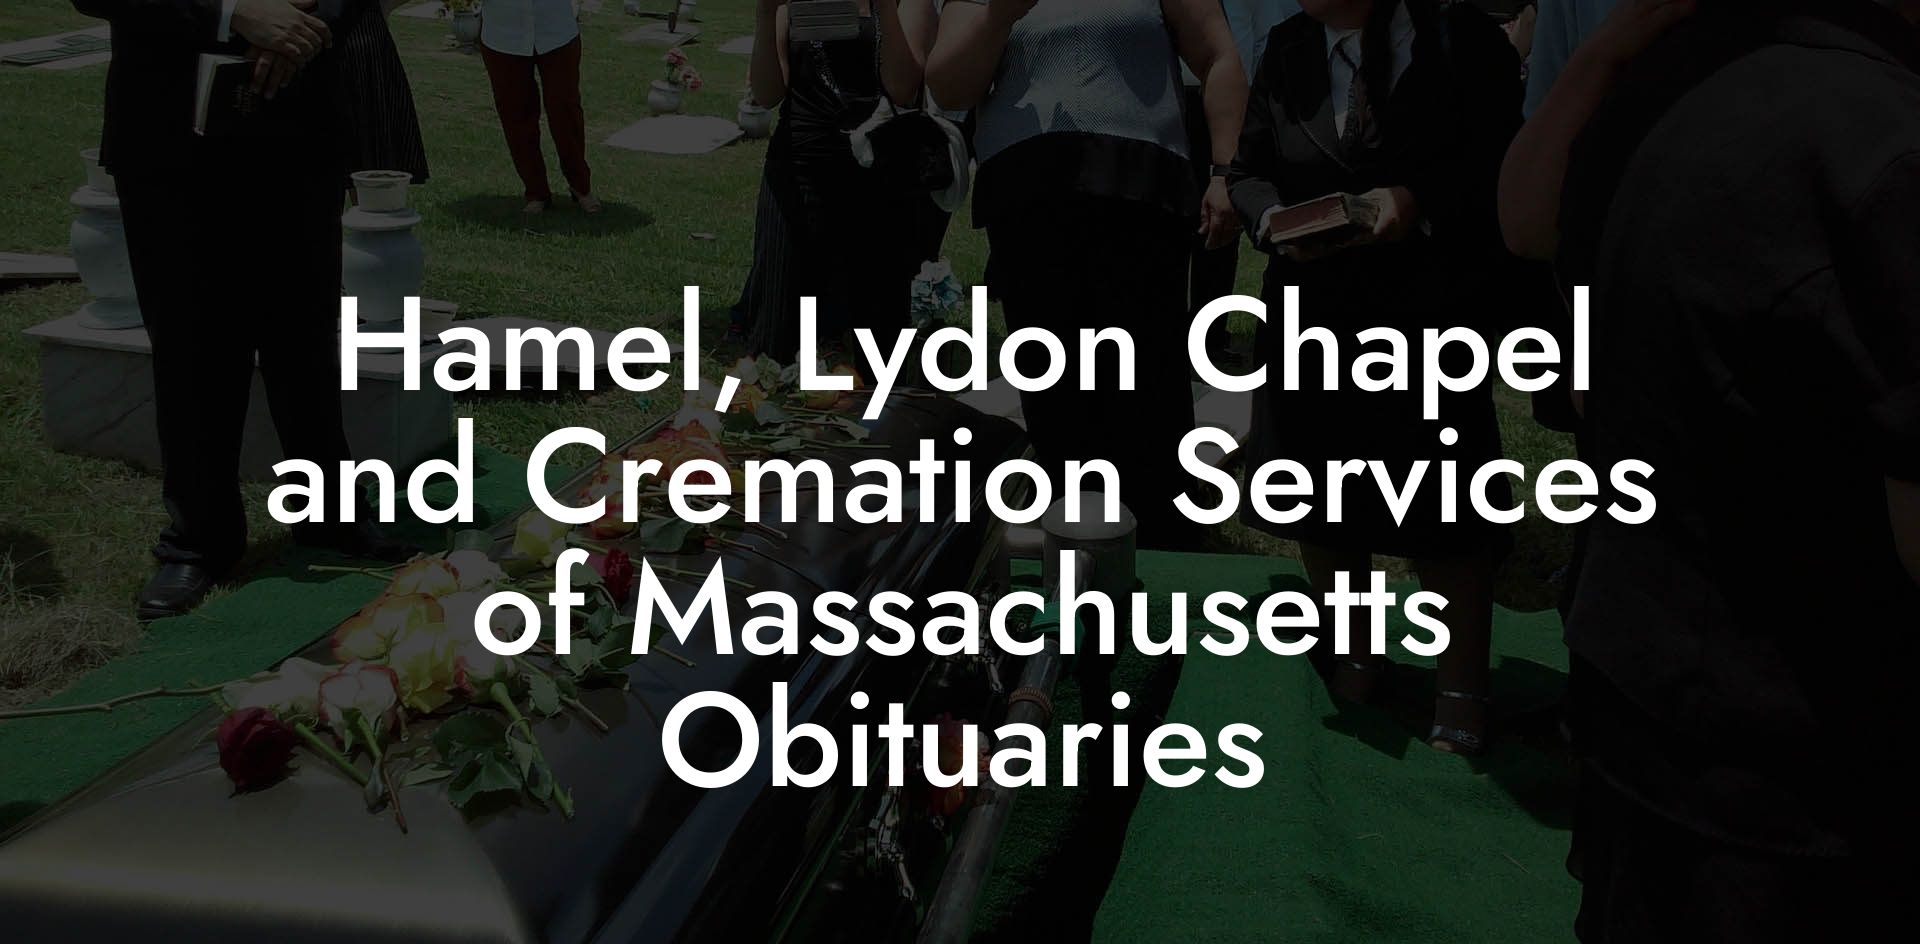 Hamel, Lydon Chapel and Cremation Services of Massachusetts Obituaries